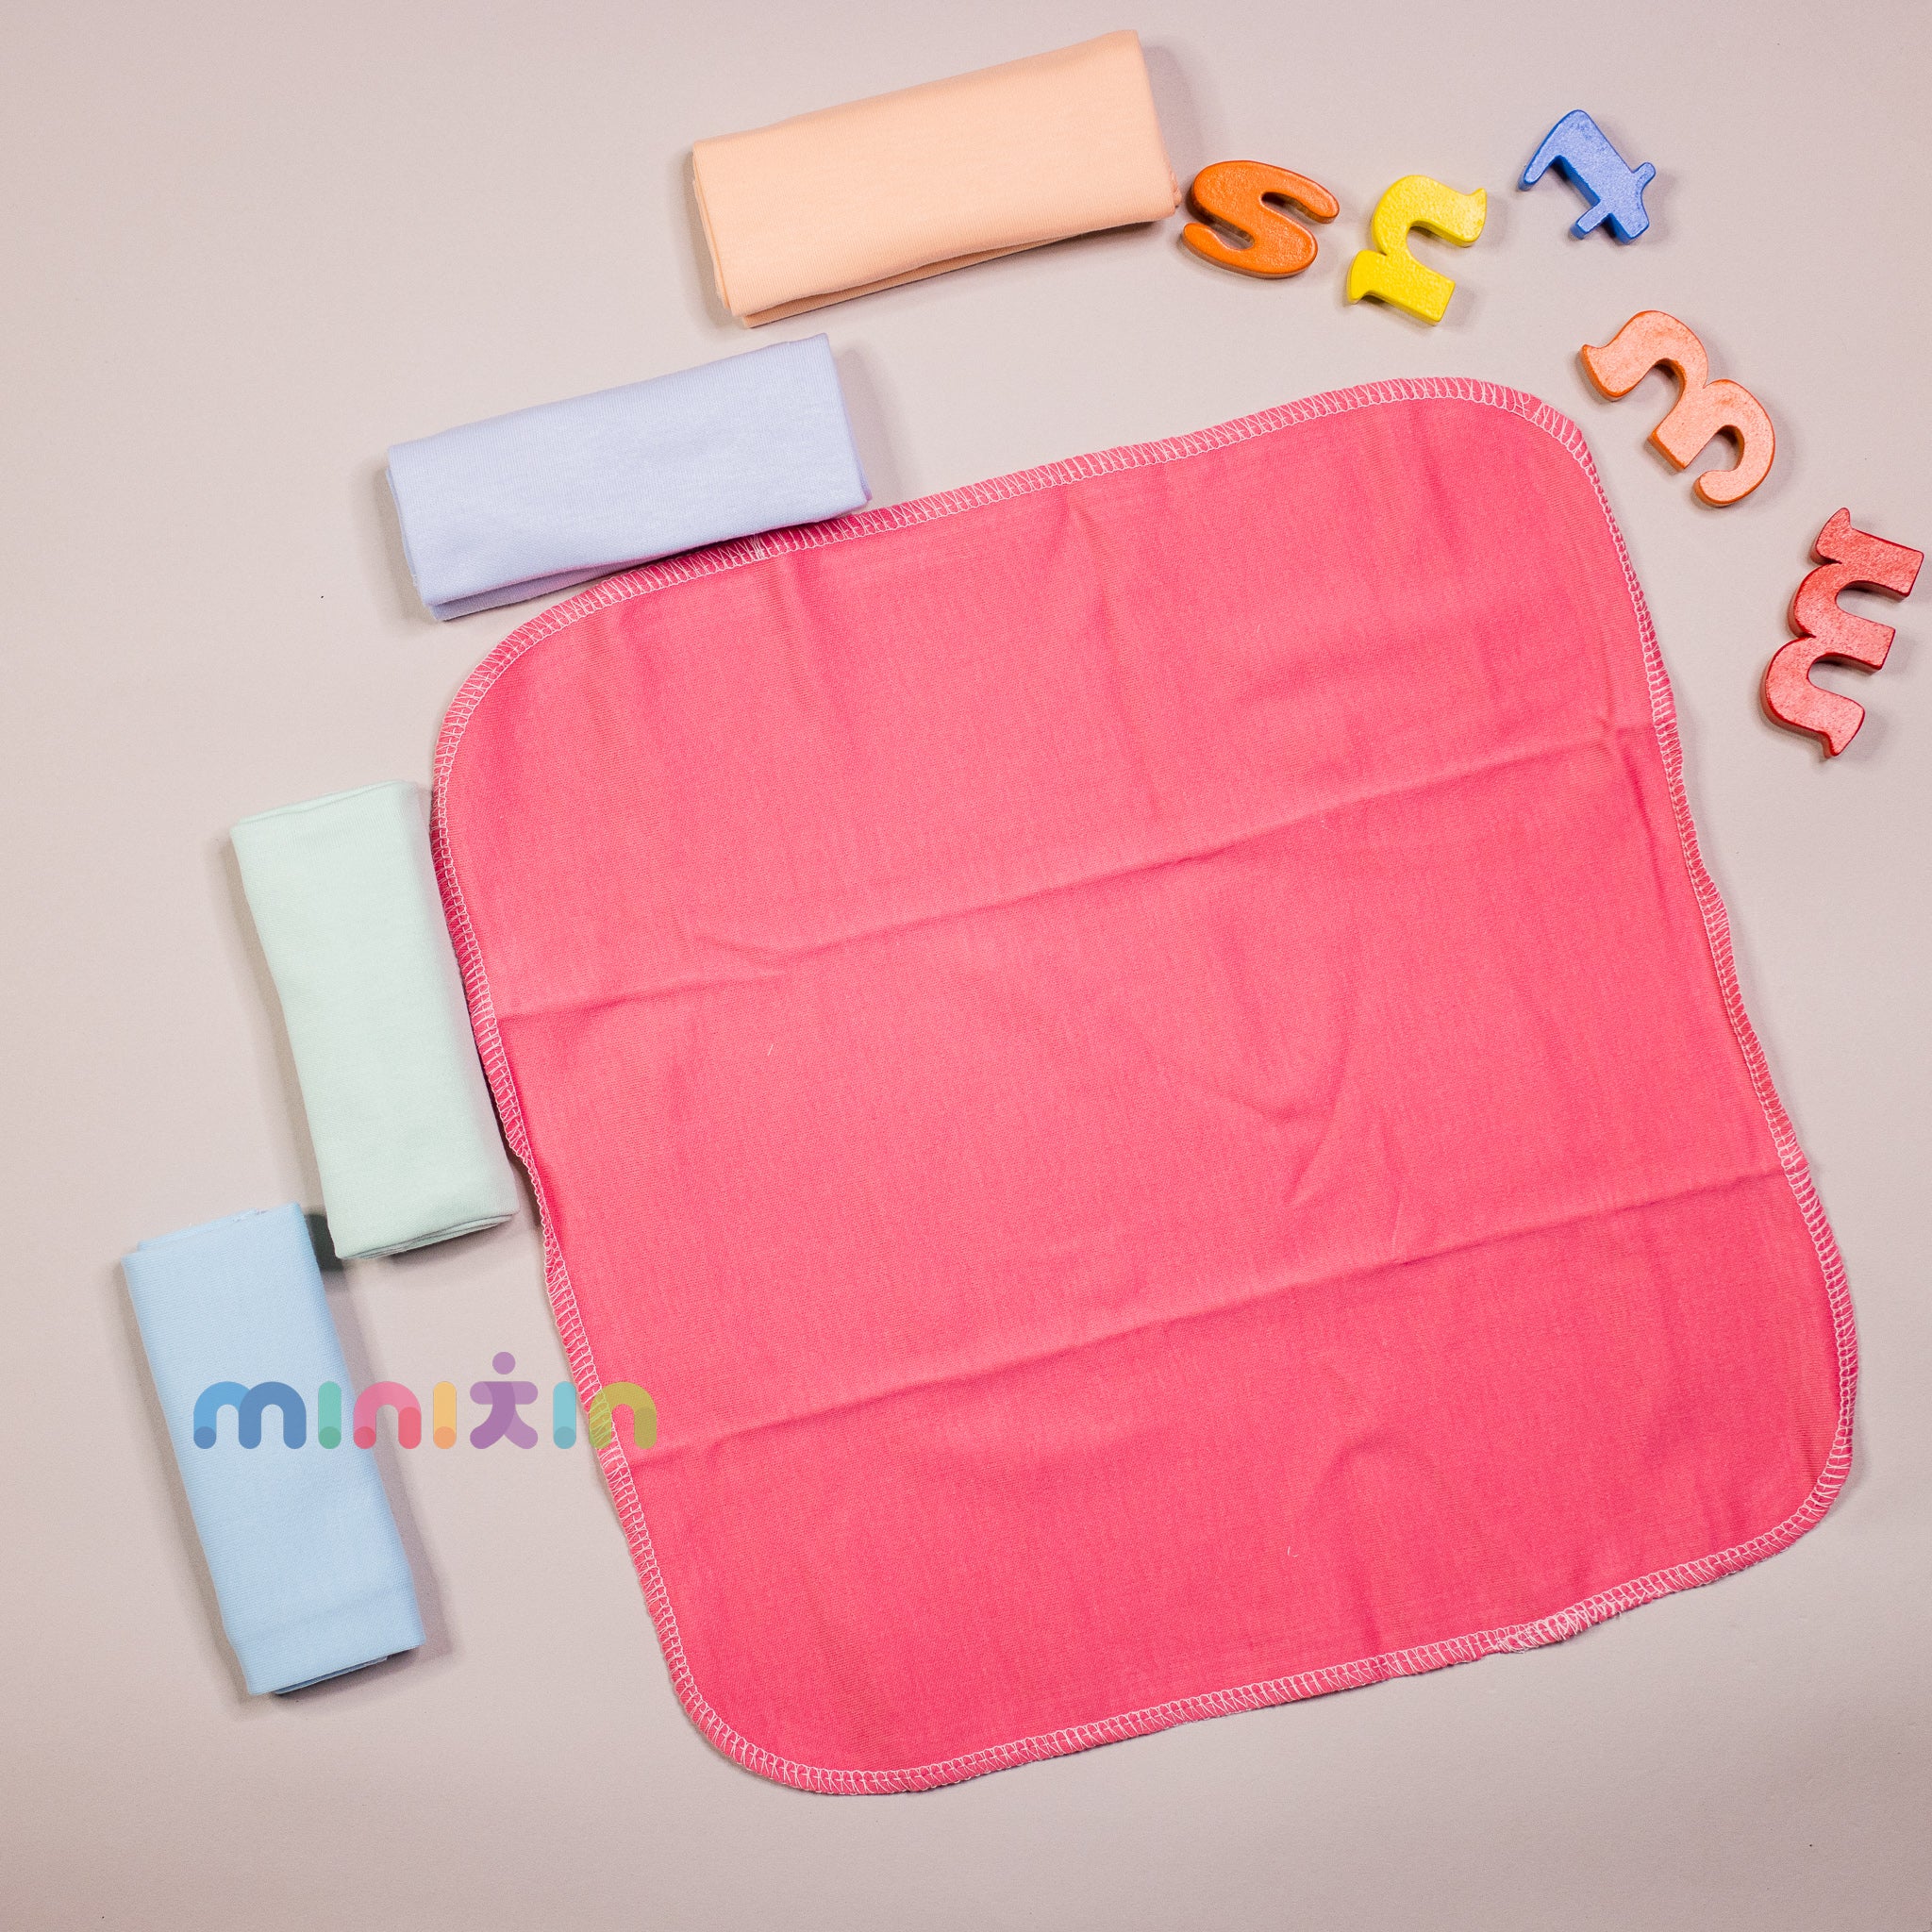 Super Absorbent & Soft - 100% Organic Cotton Wash Cloths/Squares/Reusable Baby Wipes/Baby Towel - (XL) - The Minikin Store